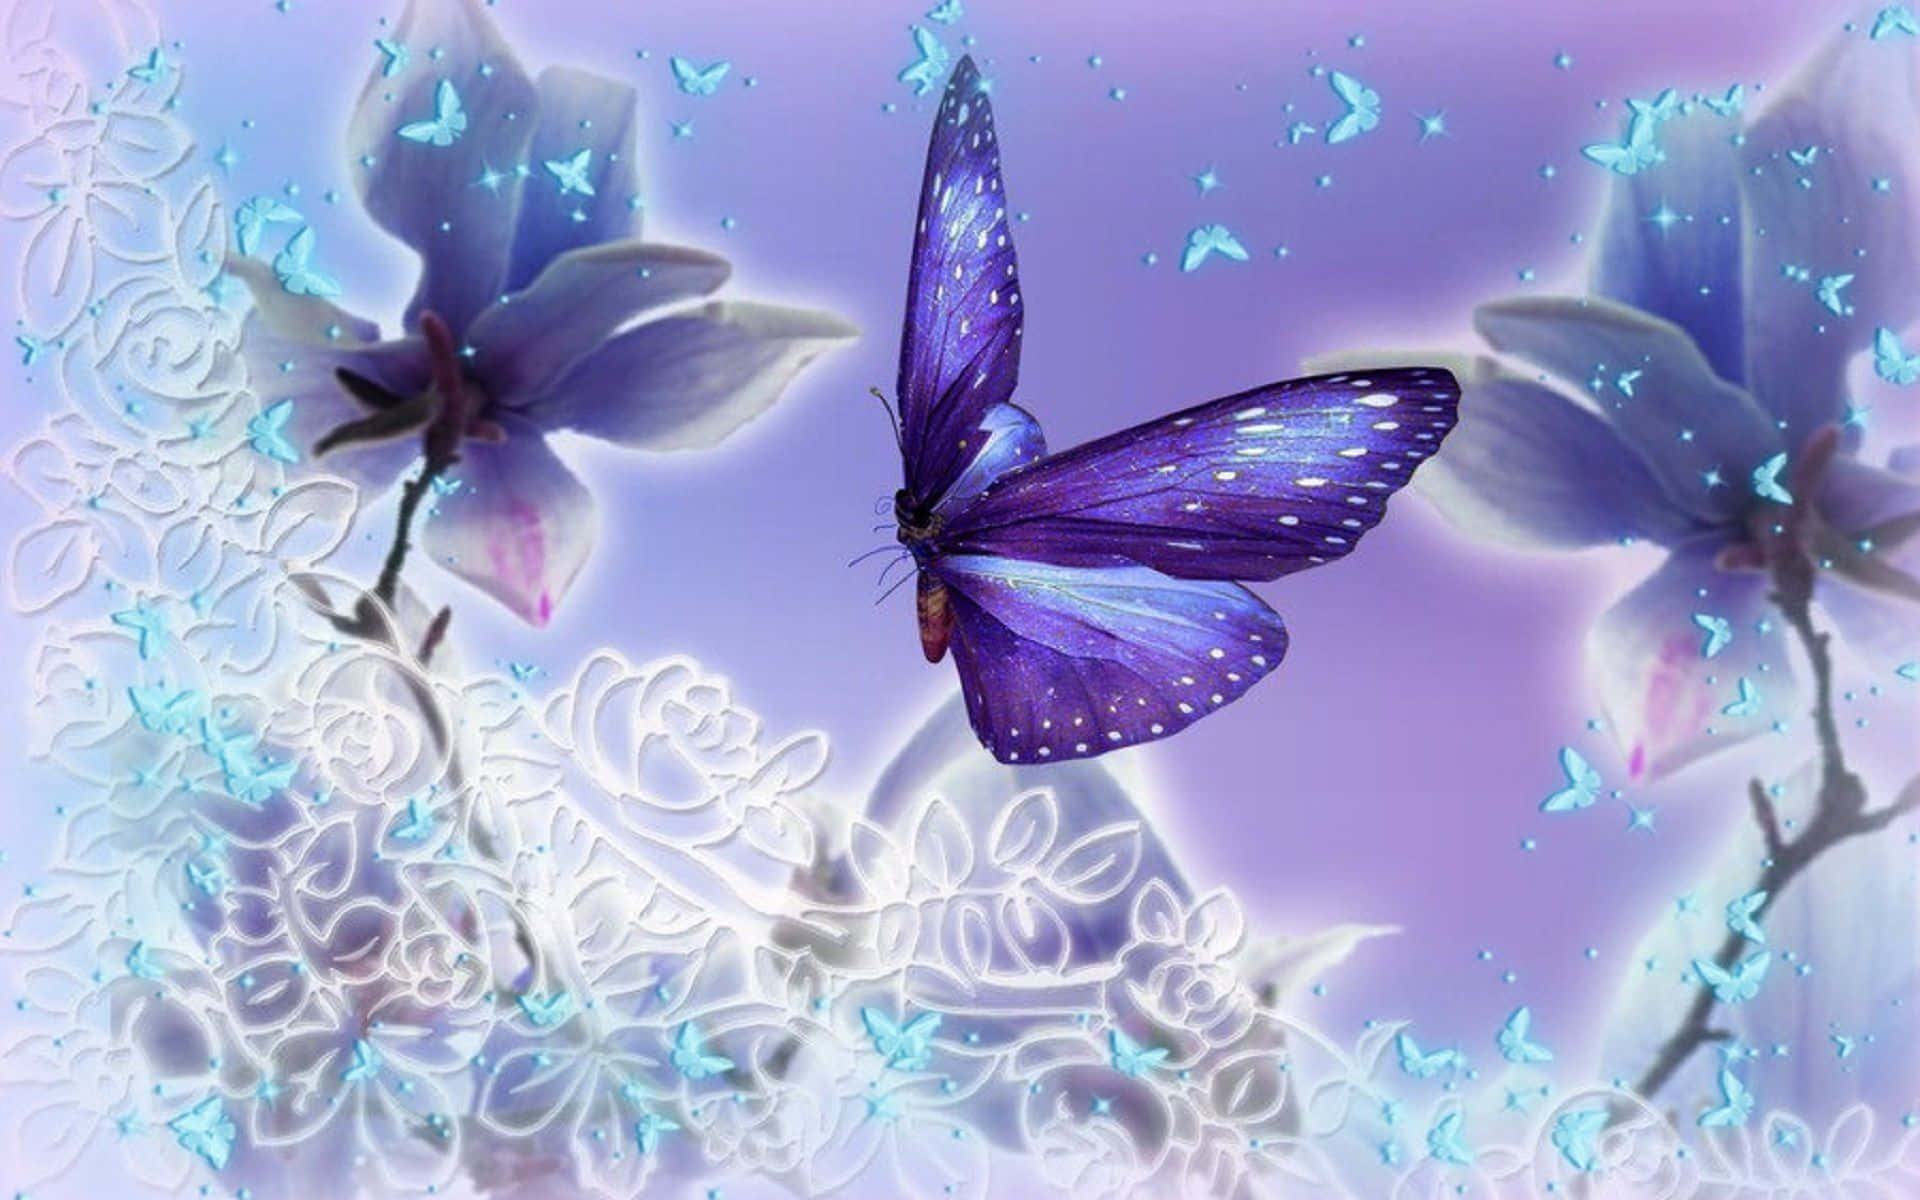 "Beautiful Butterfly against a Blurry Pastel Background"